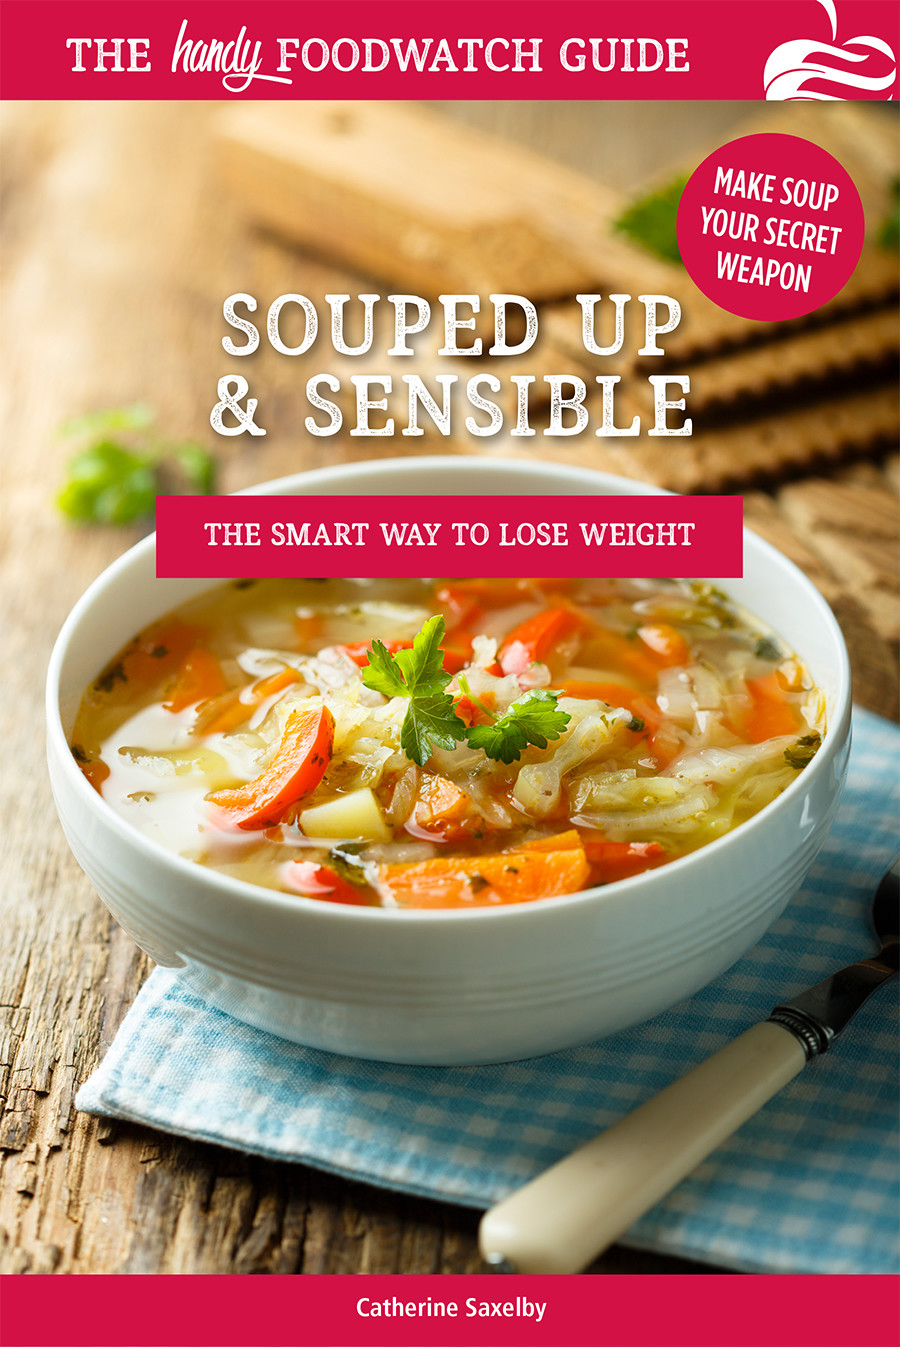 Souped Up and Sensible ebook